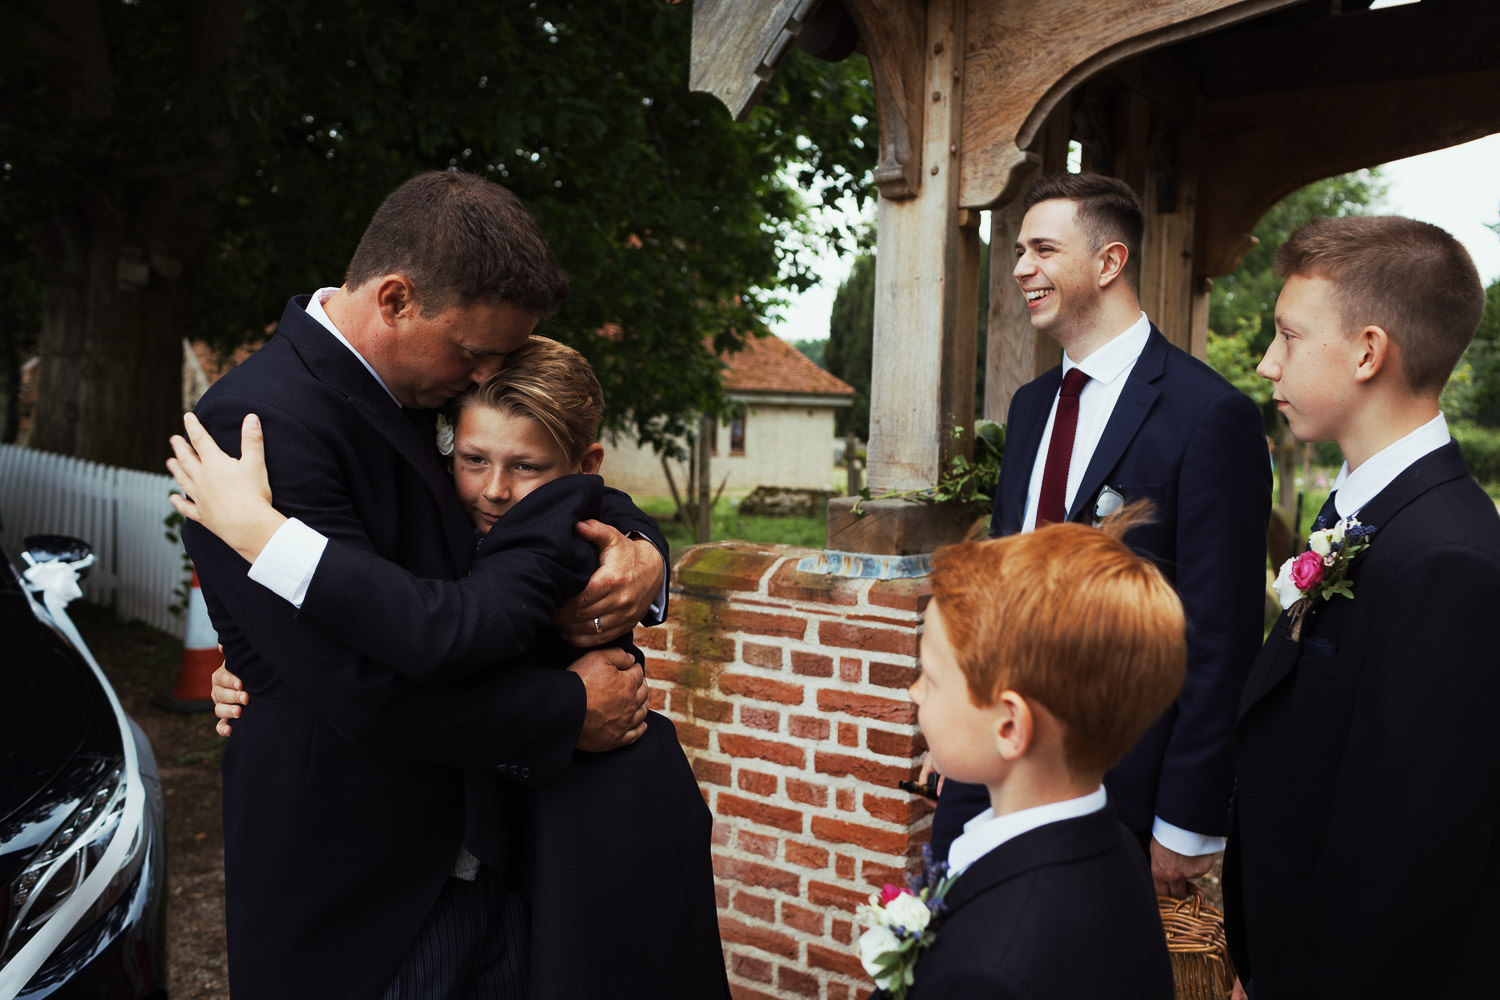 Groom hugging some younger wedding guests outside the church in Great Totham, Maldon.